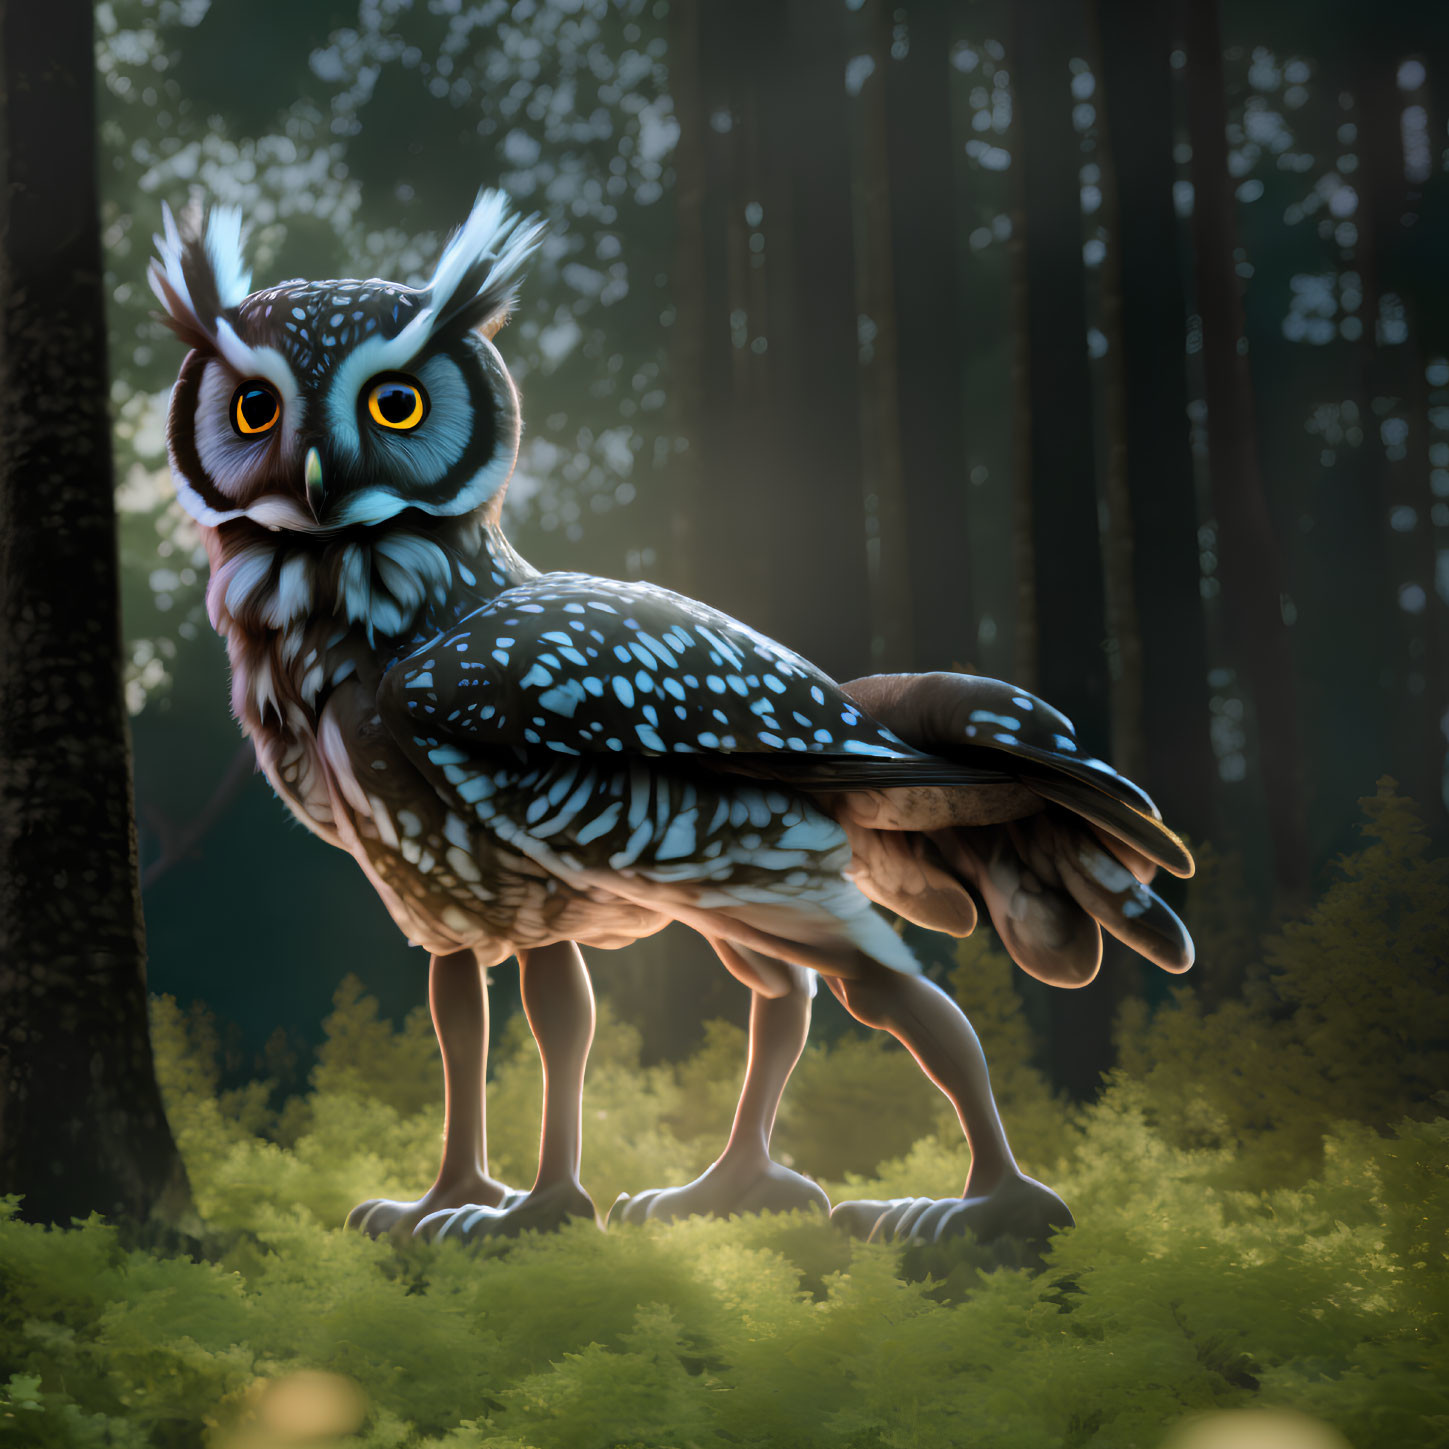 Mythical bird creature with owl head in mystical forest